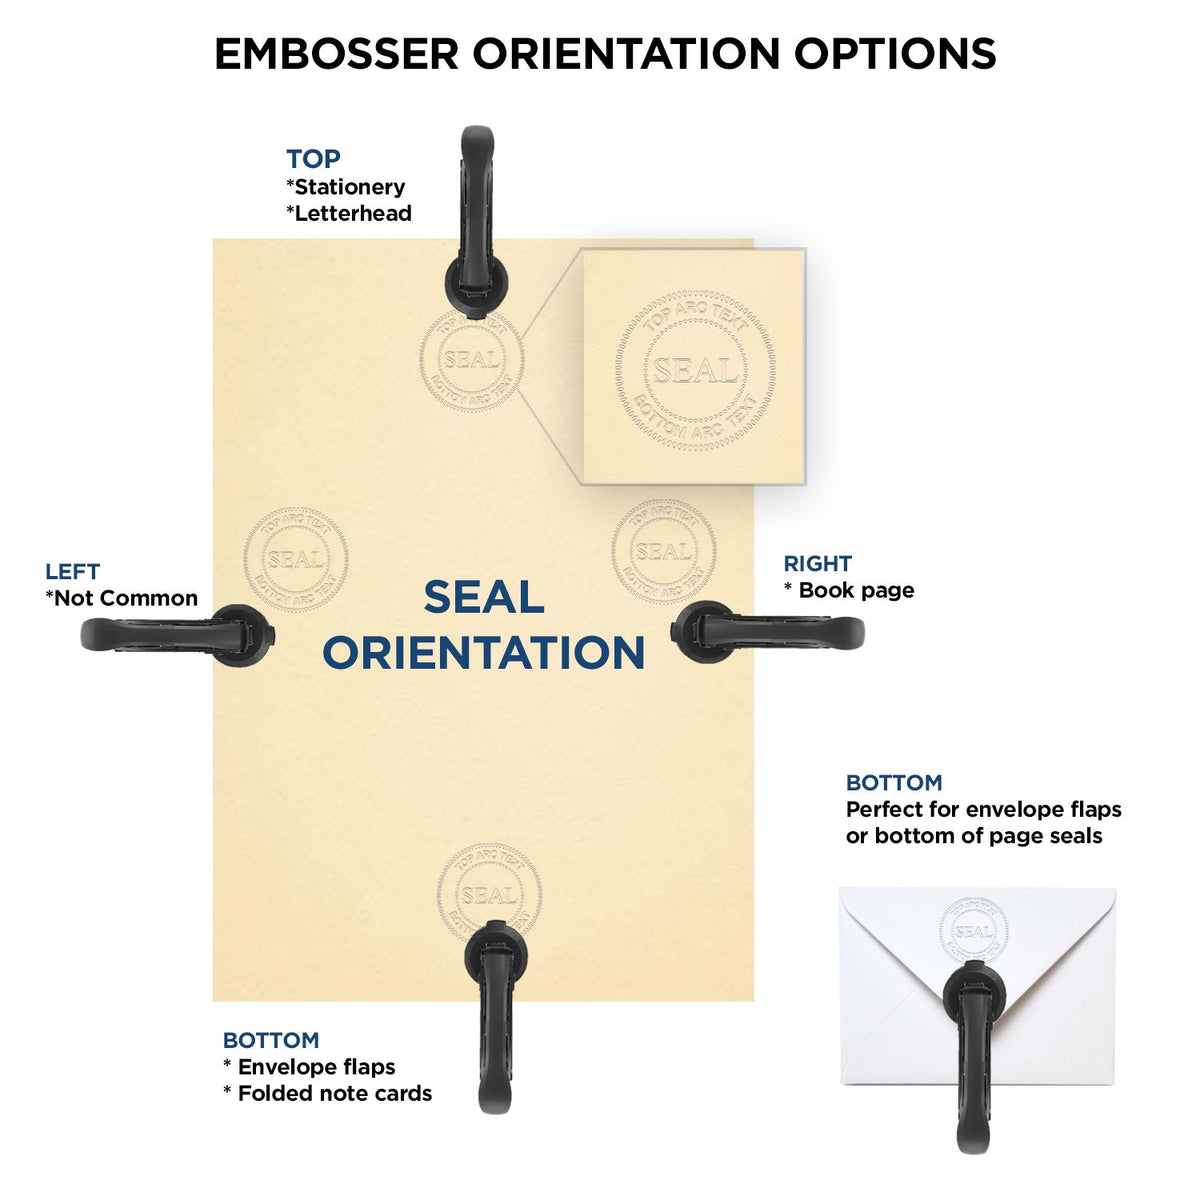 An infographic for the Heavy Duty Cast Iron Guam Geologist Seal Embosser showing embosser orientation, this is showing examples of a top, bottom, right and left insert.